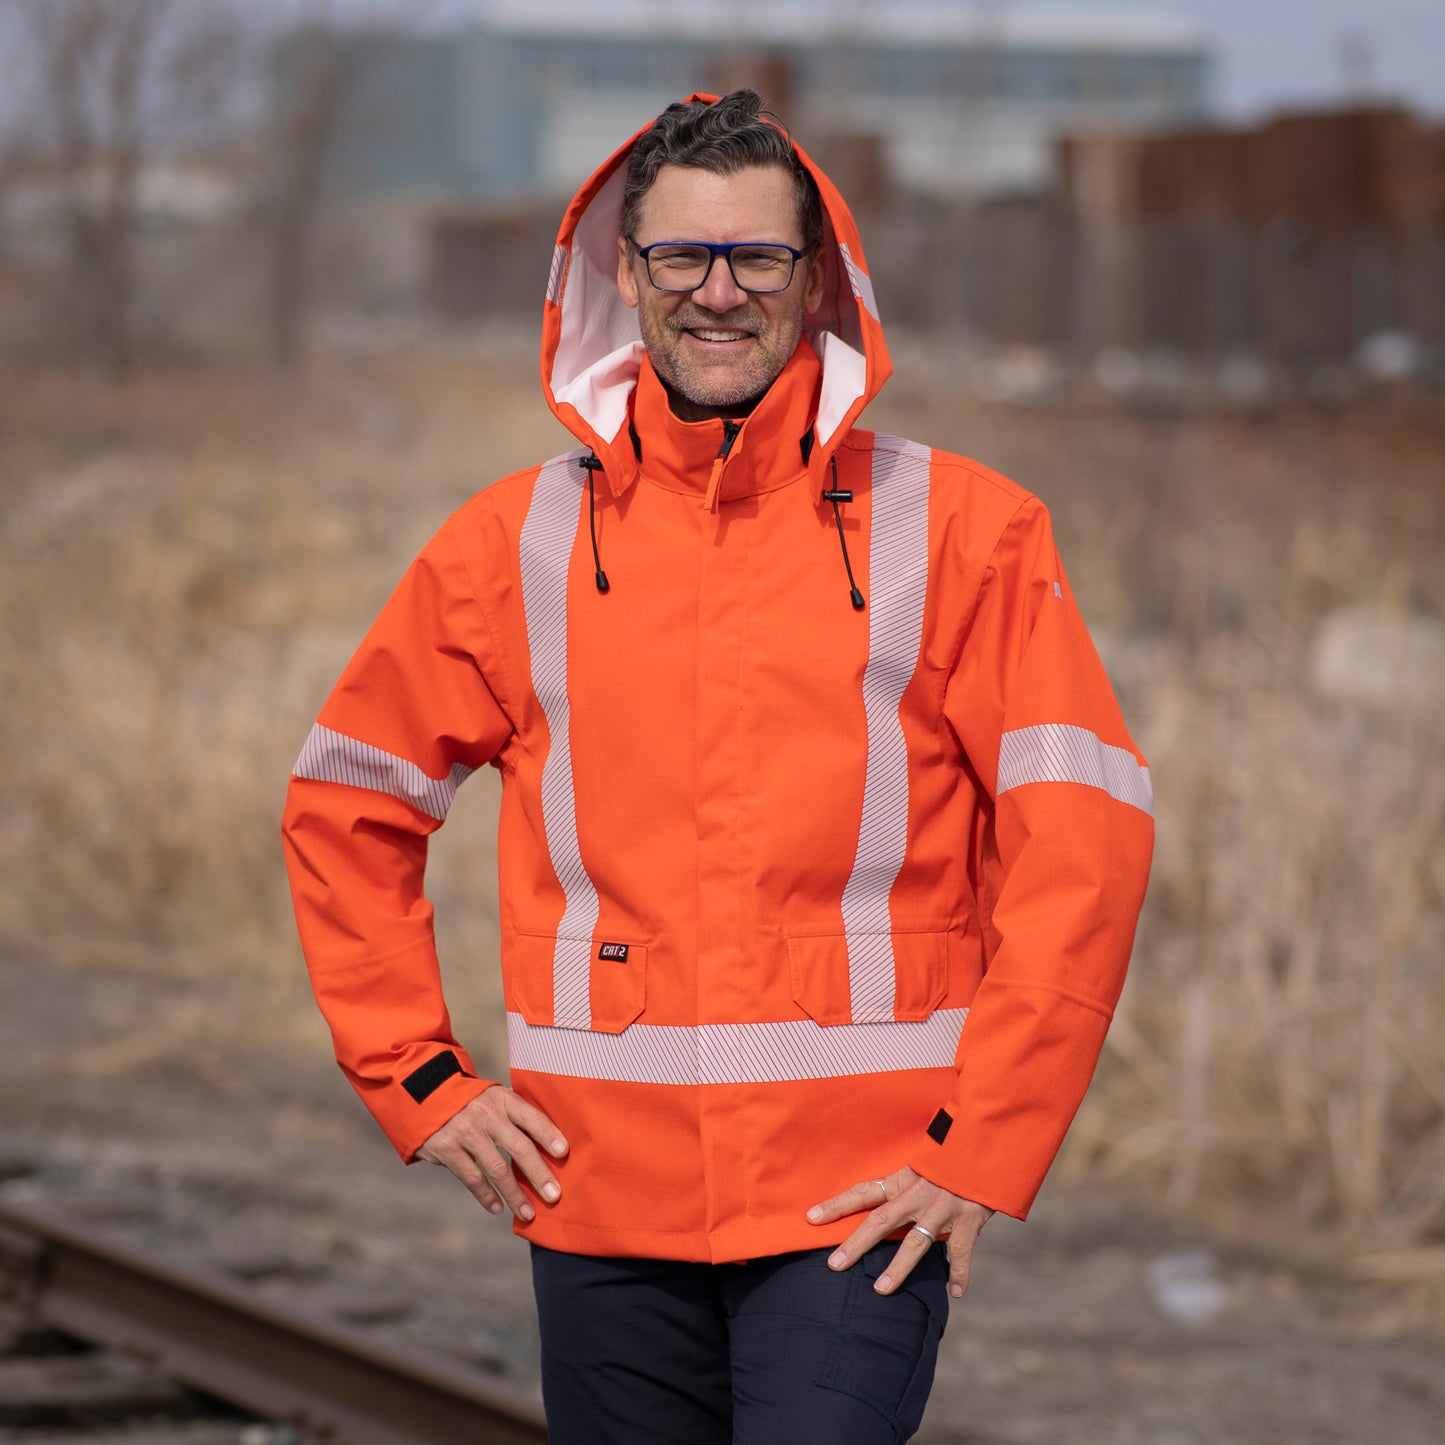 Image of MWG STORMSHIELD FR Rain Proof Jacket. MWG STORMSHIELD FR Rain Proof Jacket is bright orange in colour with silver segmented reflective tape on torso and arms to meet high-visibility standard CSA Z96-15. Model is wearing MWG FR Rain Jacket with hood up, displaying the black drawstrings and white inner lining. MWG STORMSHIELD is a lightweight laminated flame-resistant (FR) fabric.